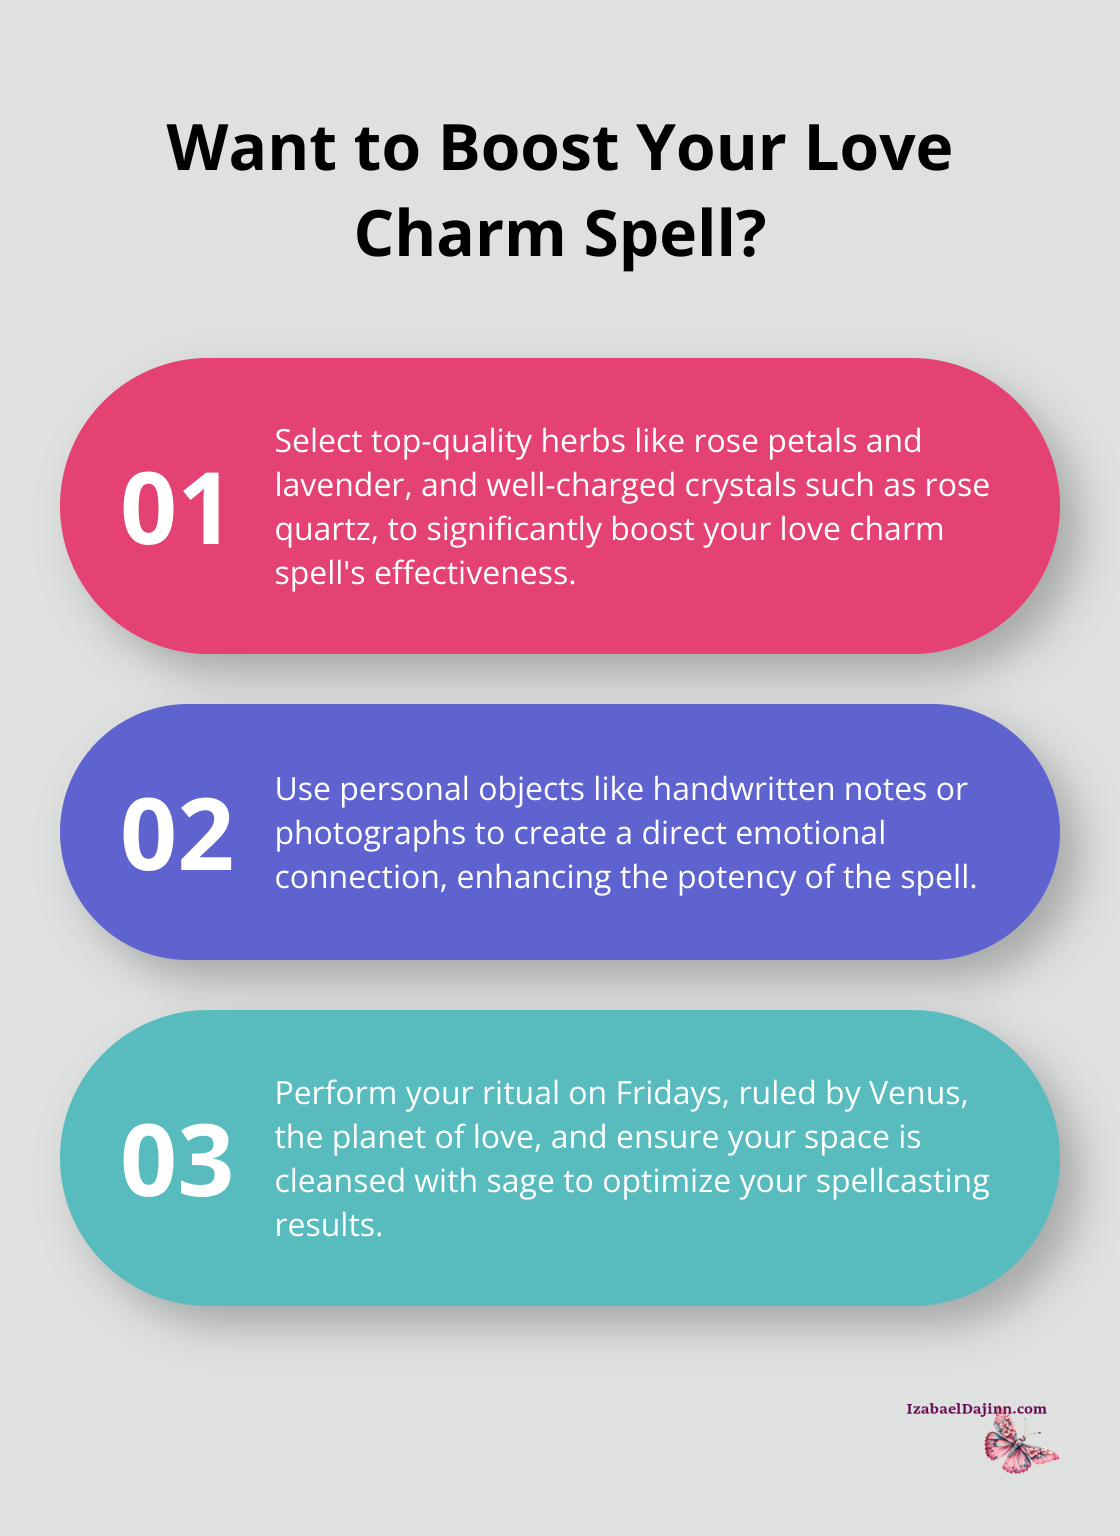 Fact - Want to Boost Your Love Charm Spell?